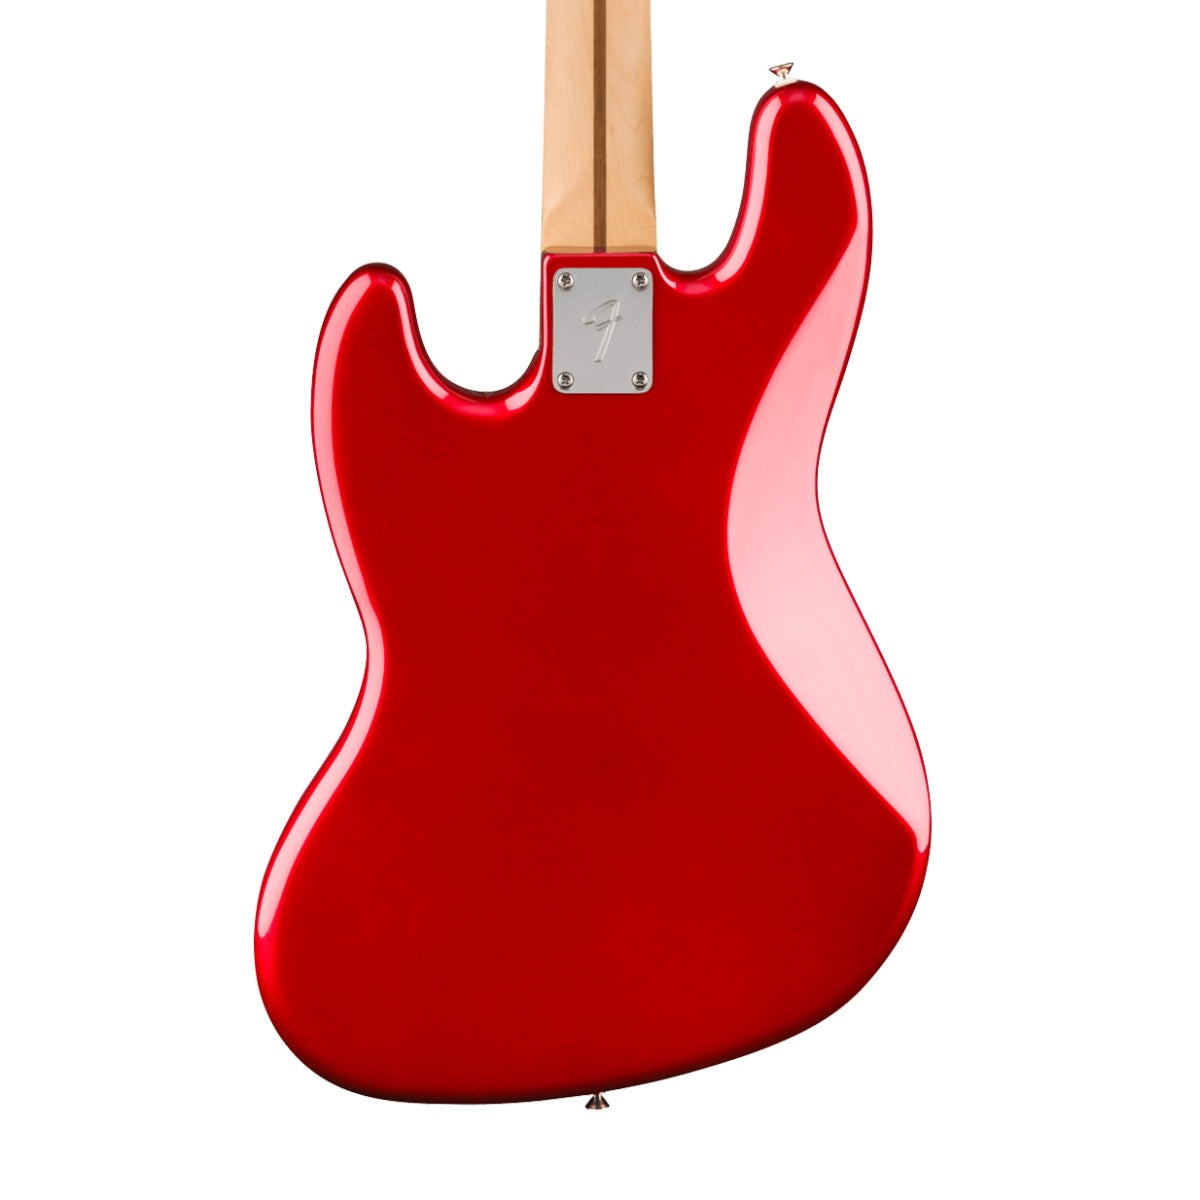 Fender Player Jazz Bass - Candy Apple Red, View 3